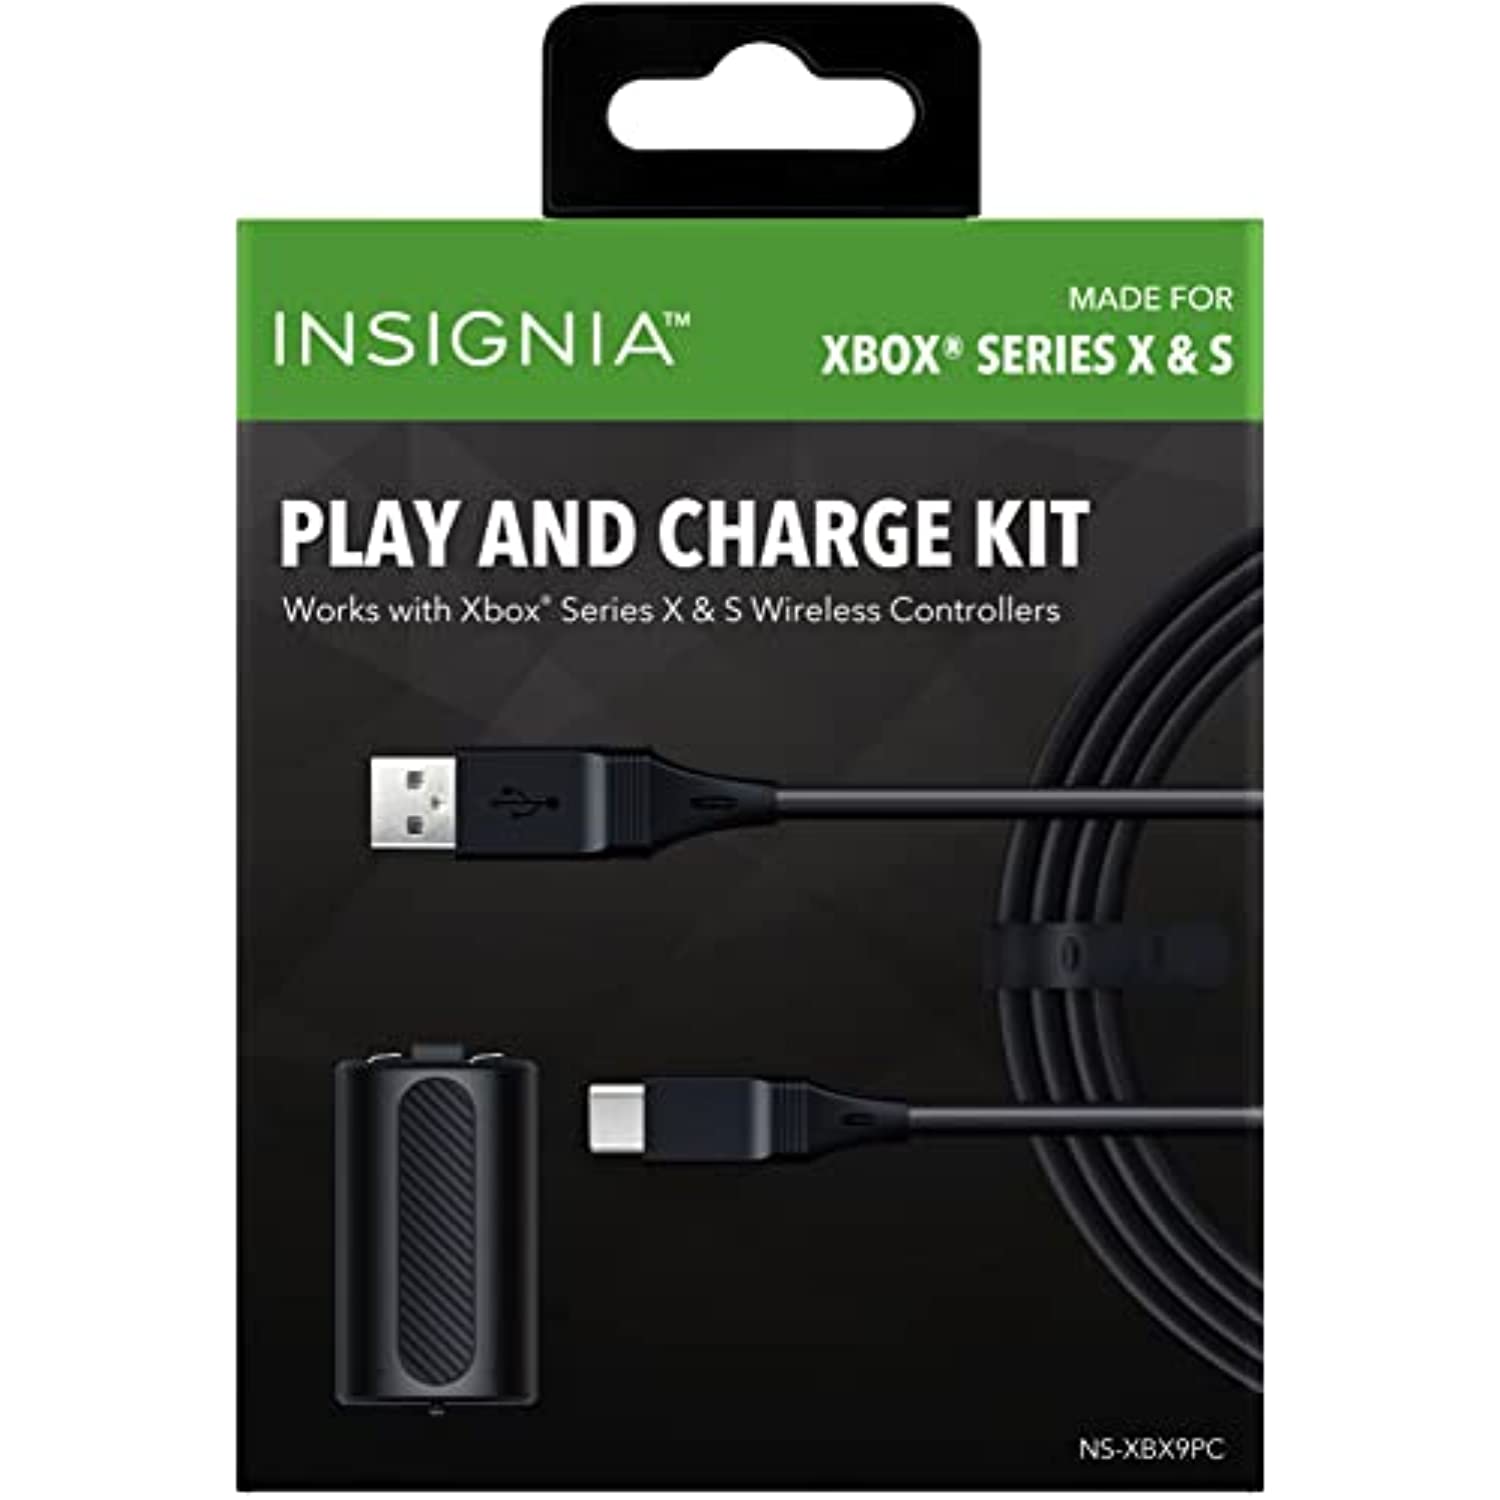 Insignia - NS-XBX9PC Play + Charge Kit for Xbox Series X | S - Black